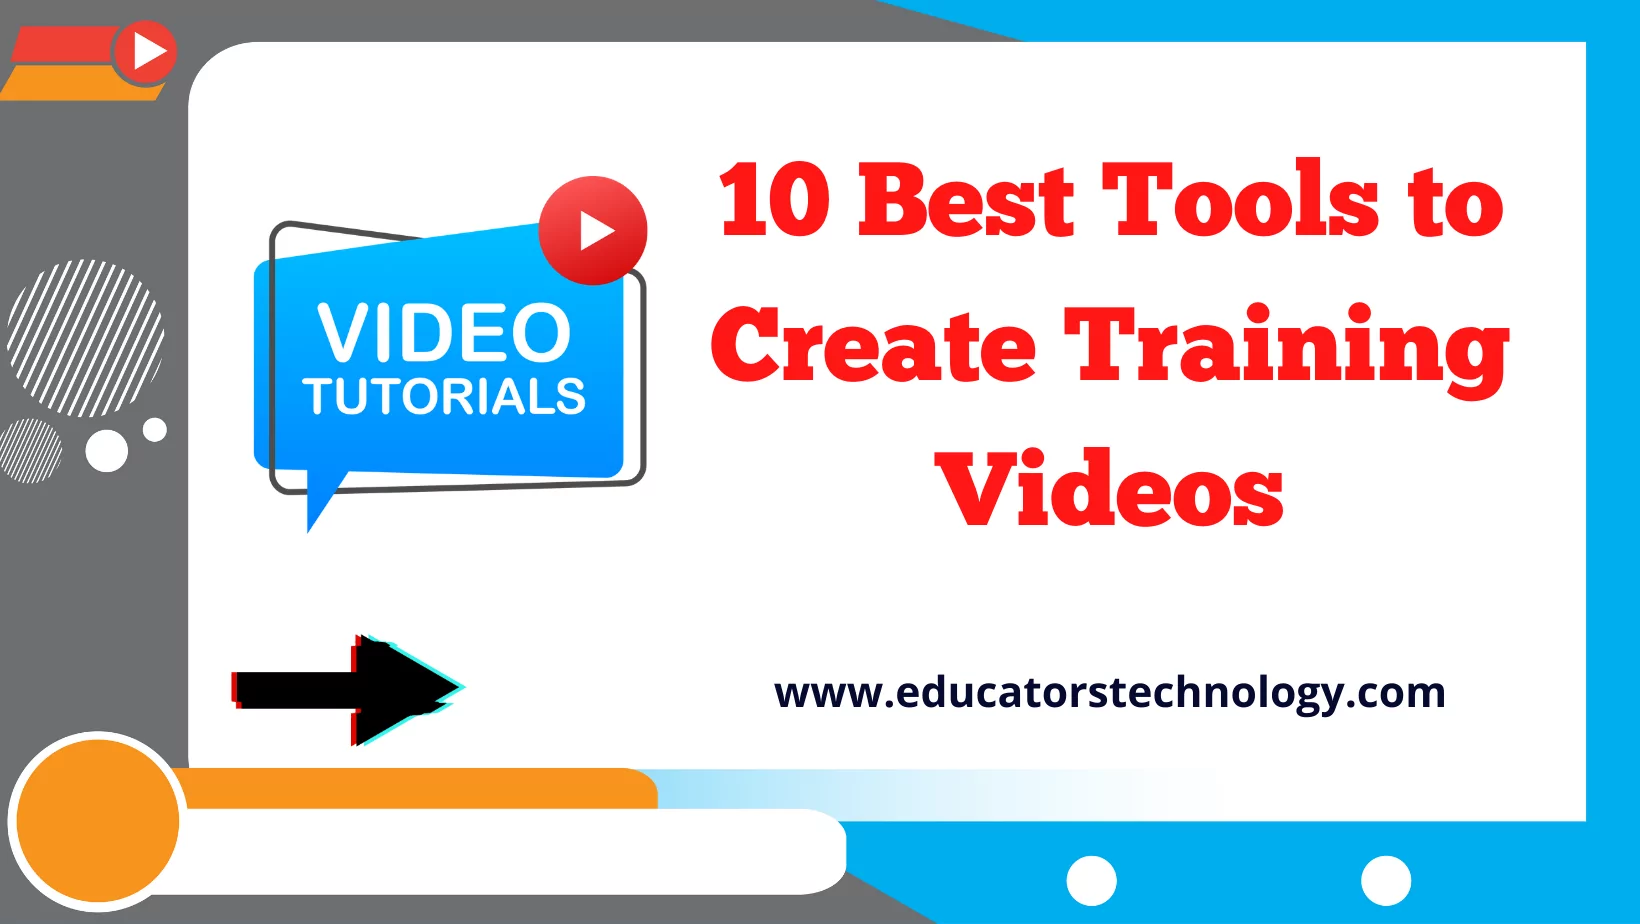 Tools to Record Training Videos